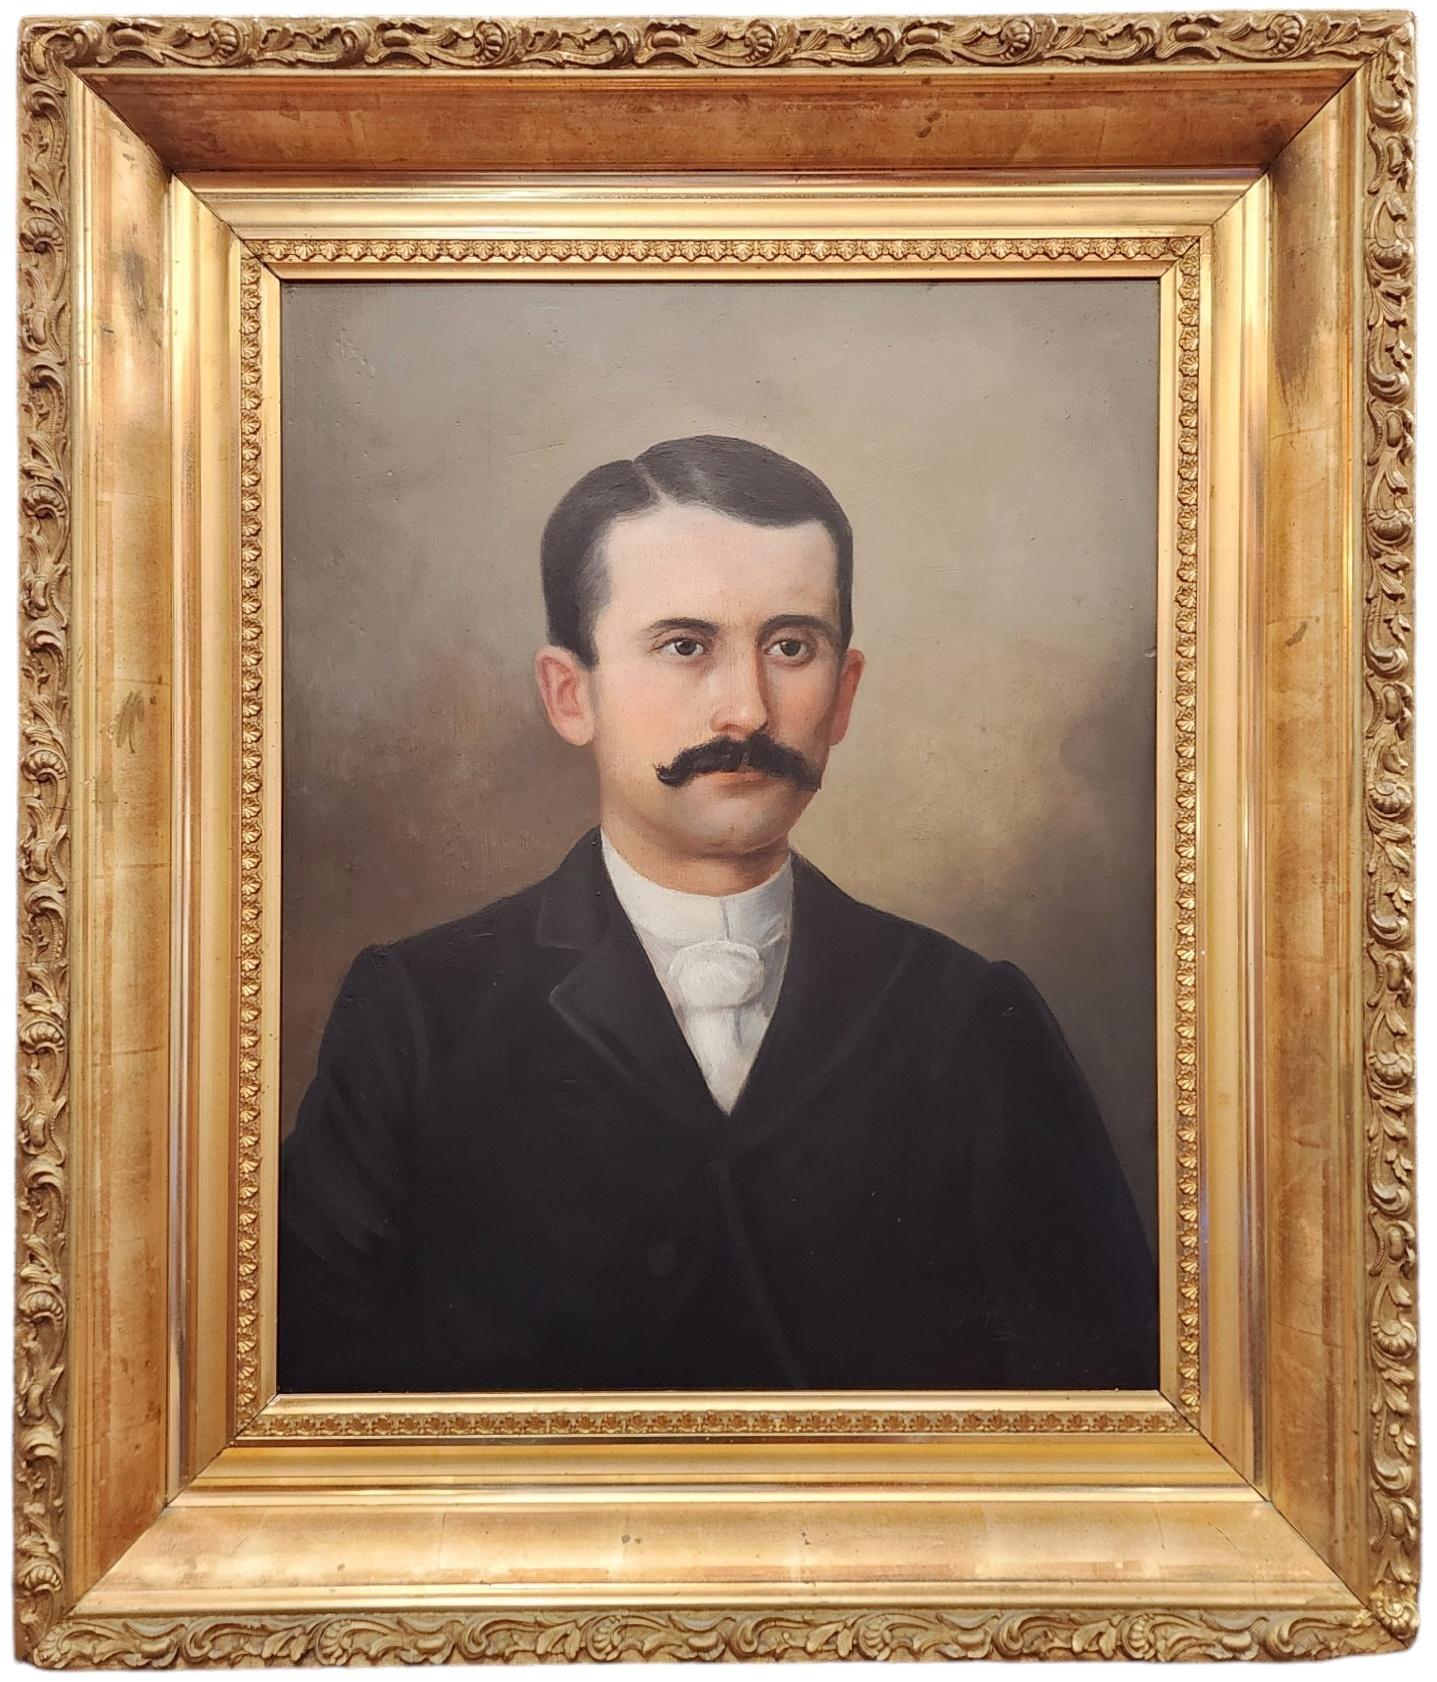 Portrait of a Gentleman, Man with a Mustache, Late 19th Century, American Denver - Painting by J. H. Wyckoff